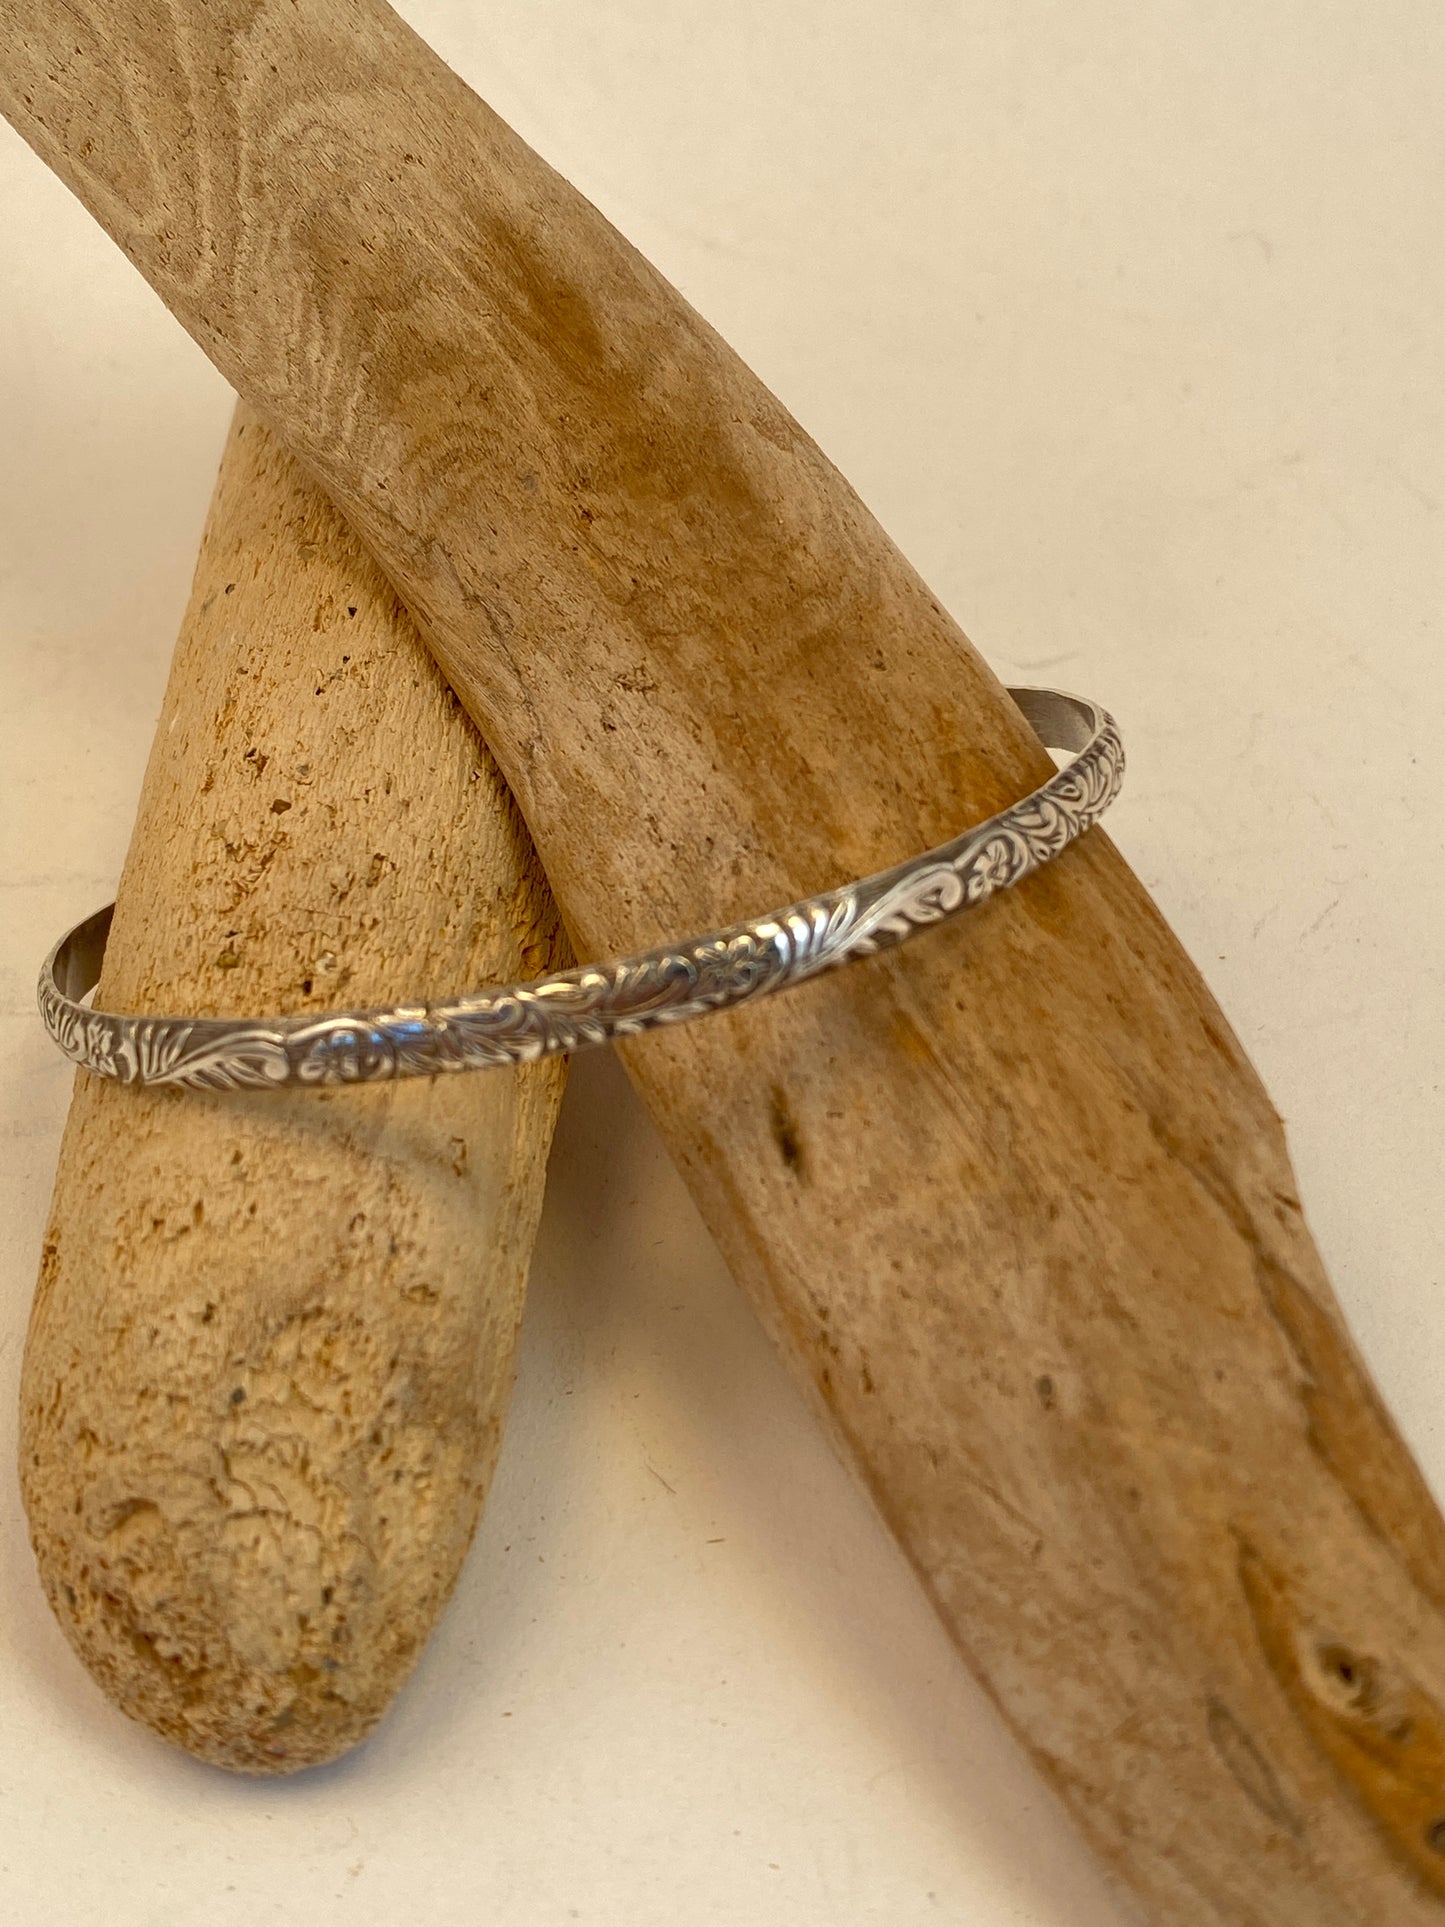 Hand-crafted sterling silver bangle bracelet with beautiful botanical texture.  Style: boho, organic, earthy yet elegant